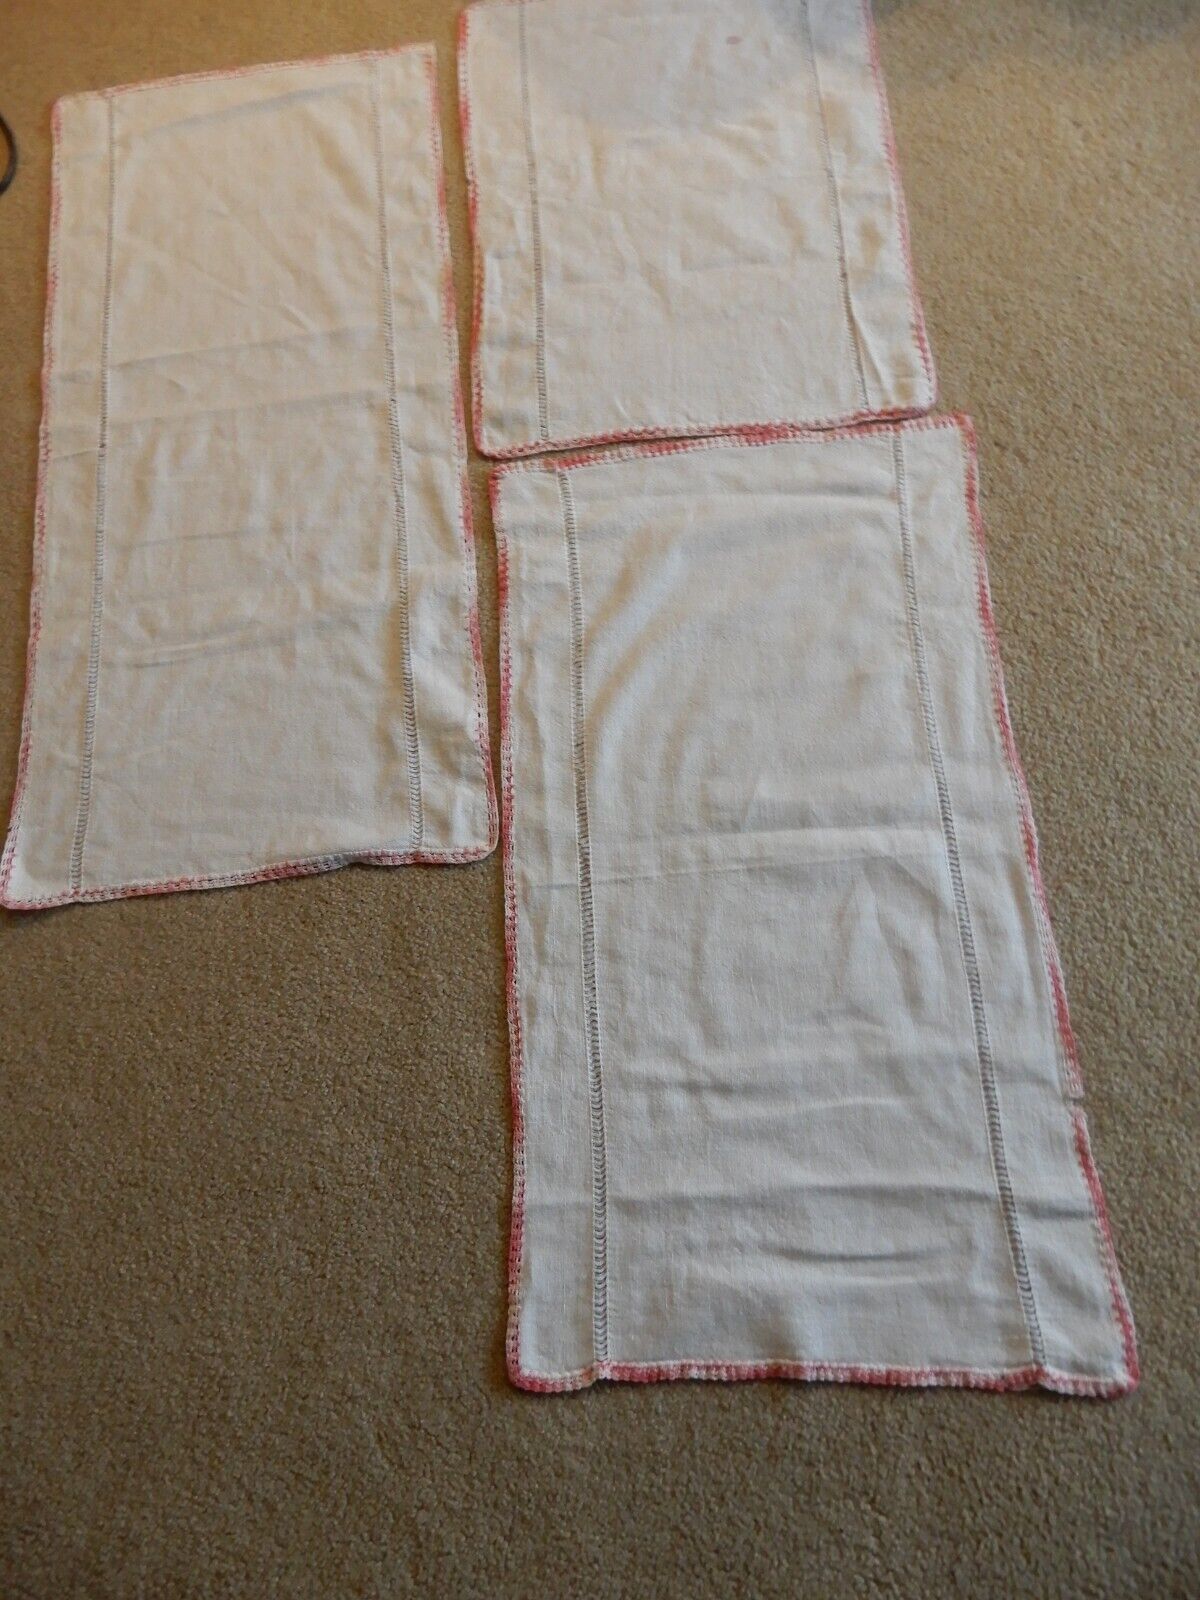 VINTAGE LOT OF 3 DOILIES TABLE TOP RUNNERS PINK EDGE 16 X 32 16 X 35 16 X 29.5\